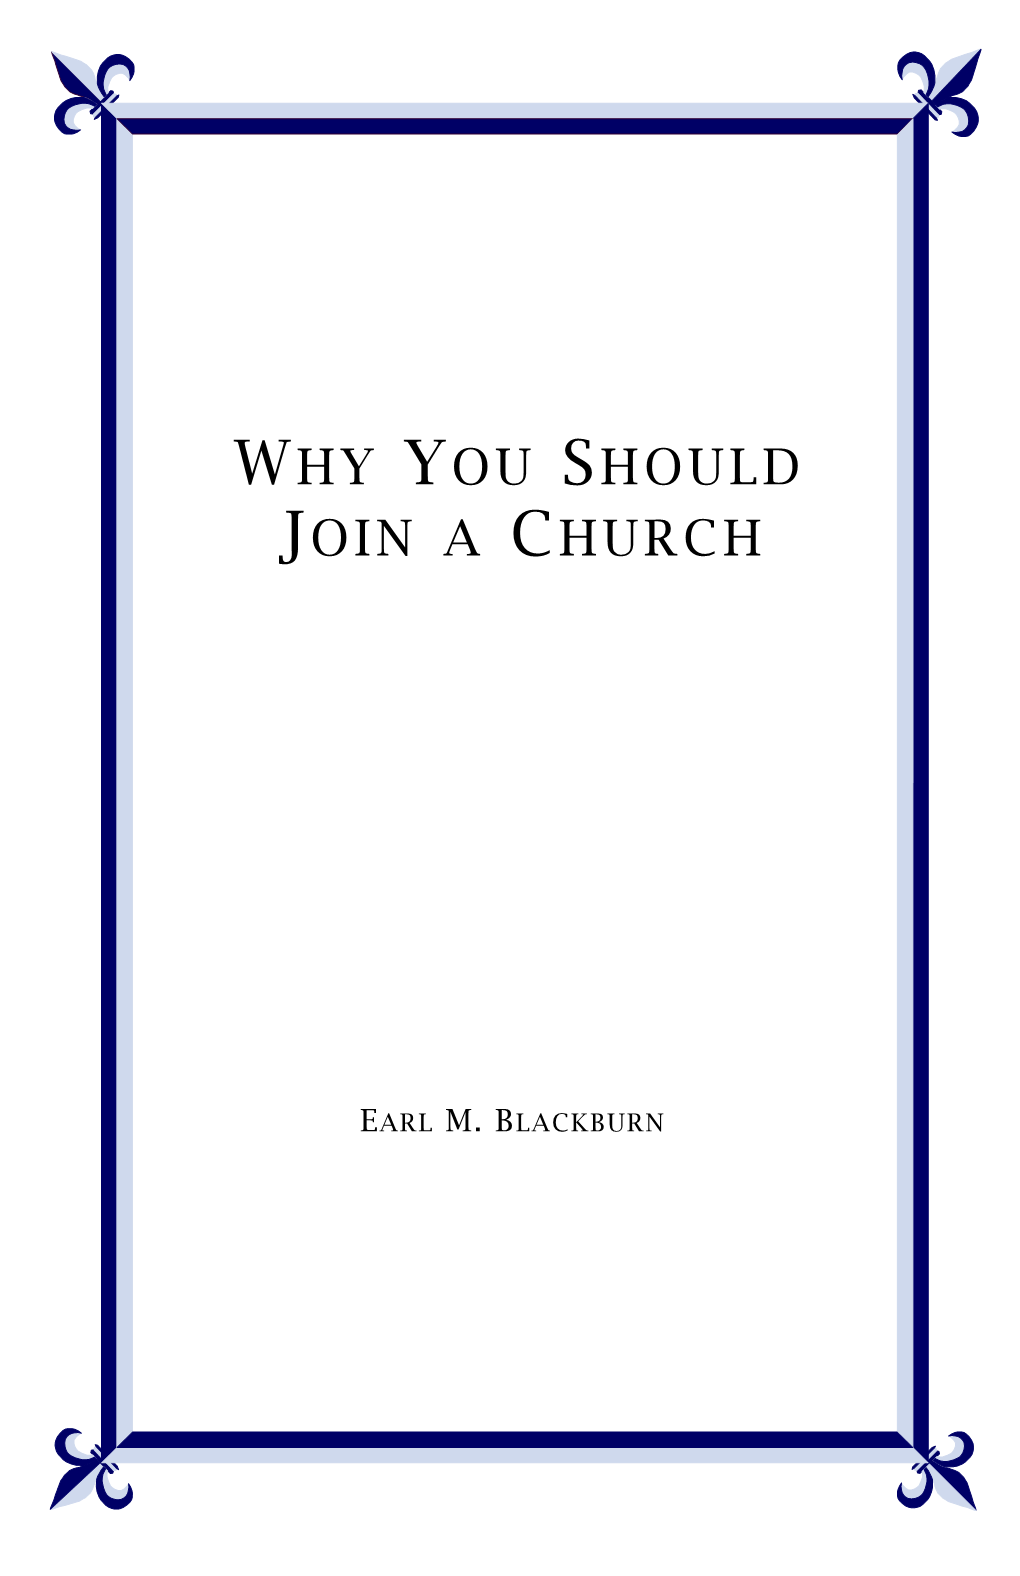 Why You Should Join a Church